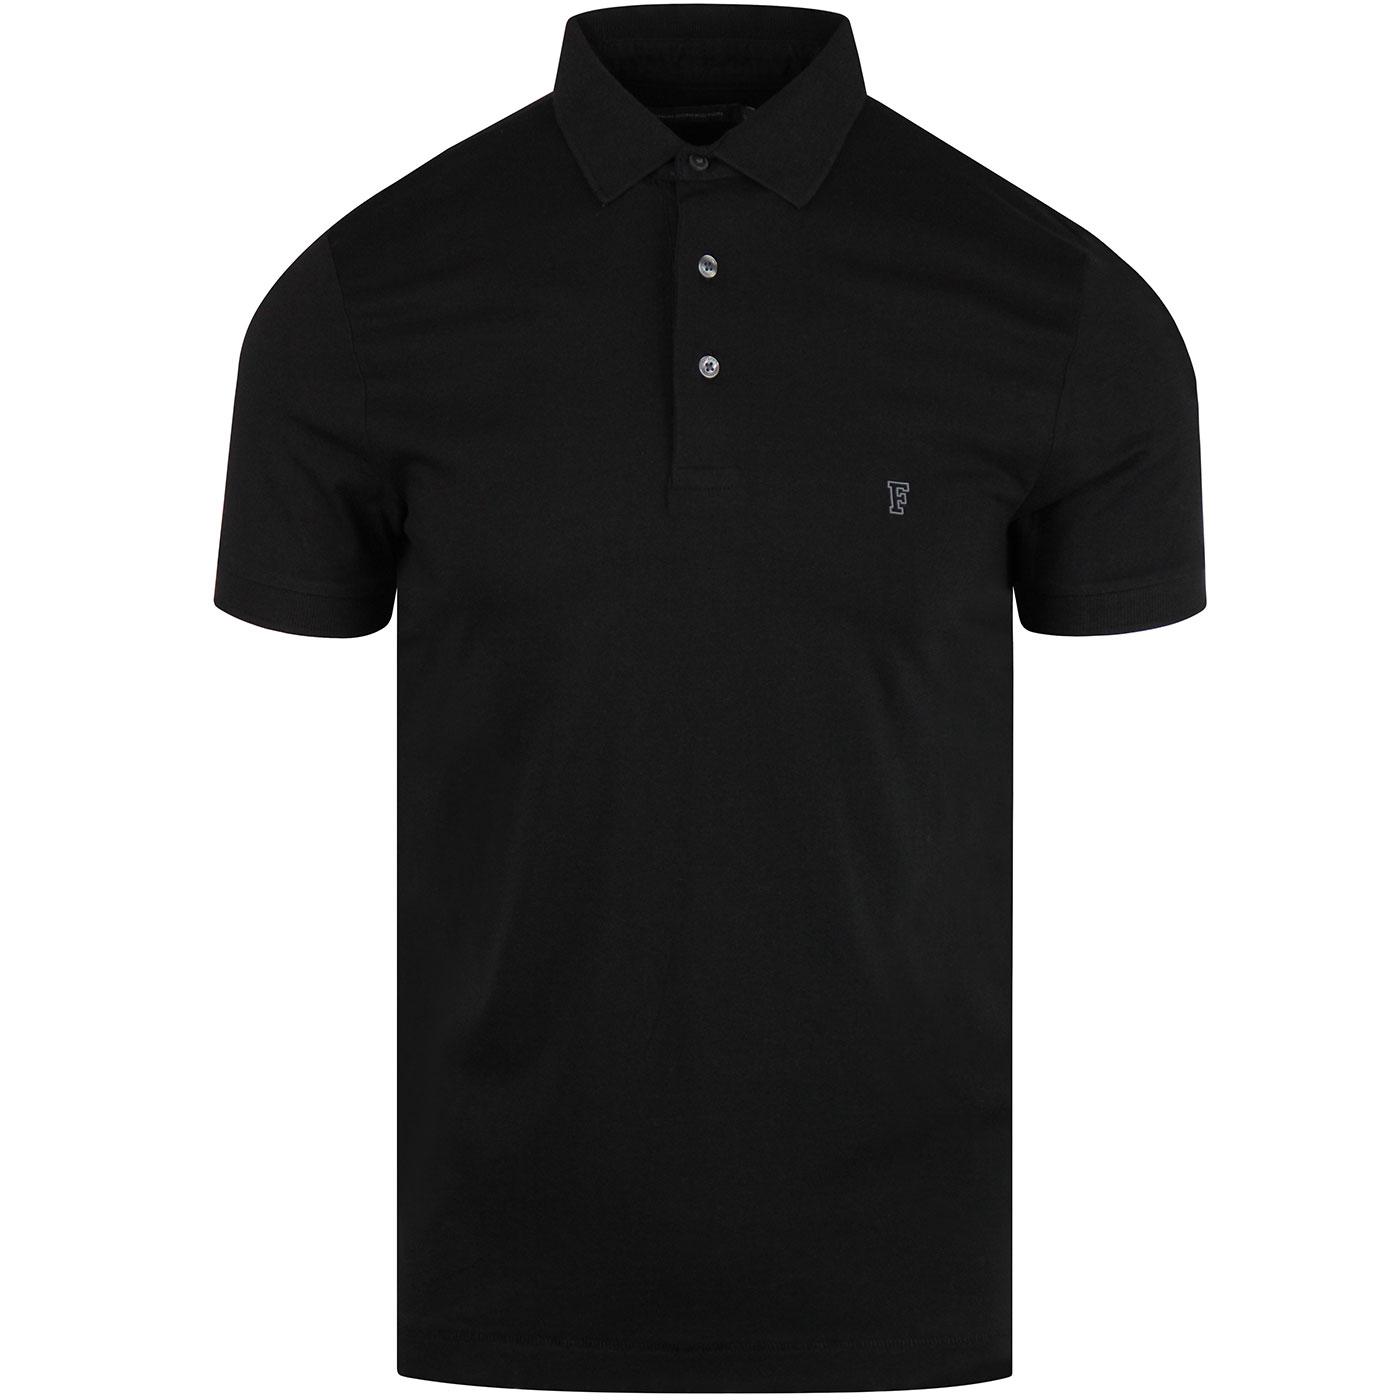 Sneezy FRENCH CONNECTION Mod Jersey Polo BLACK